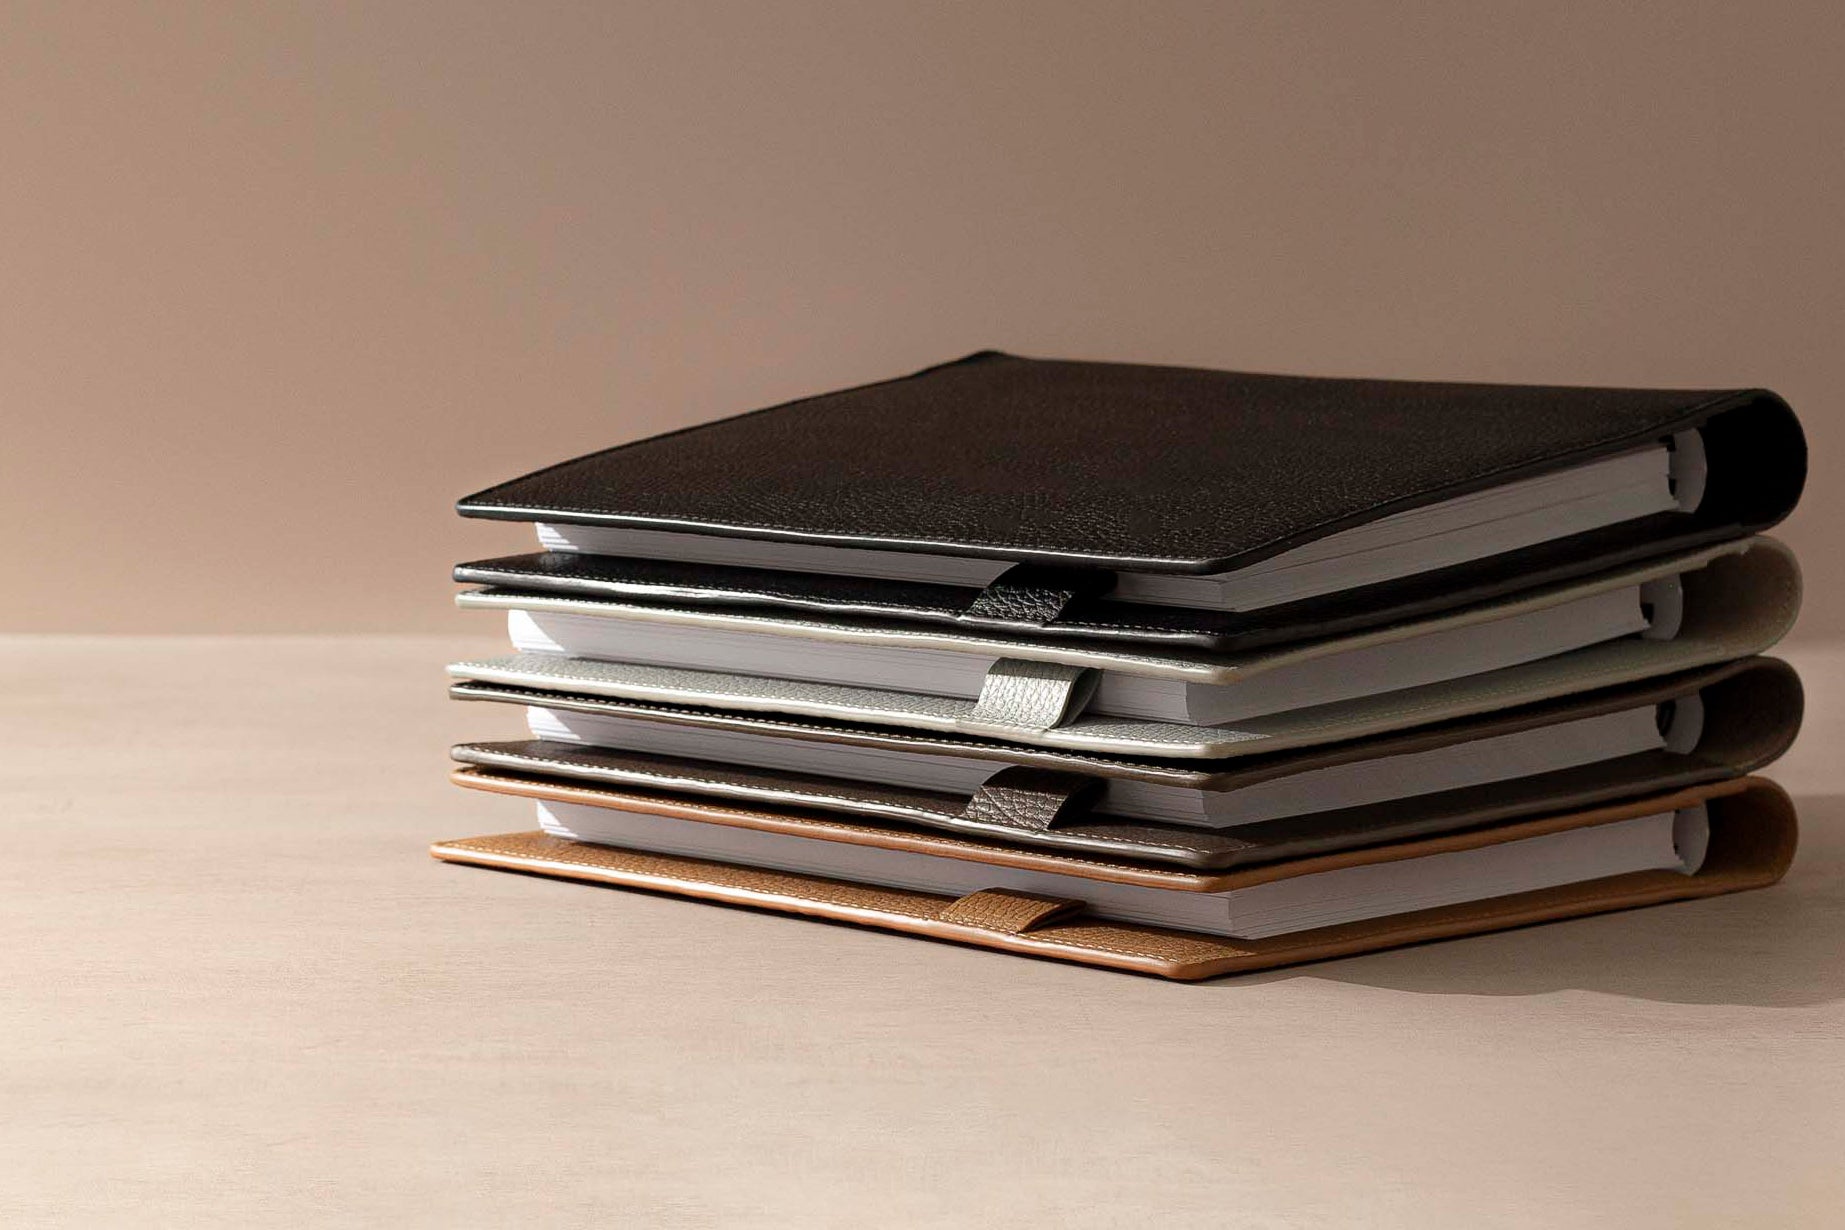 Heirloom Leather Folios in HP Classic are stacked on a desk against a light brown background.  Inside the Folios are España Spiral Notebooks in HP Classic.